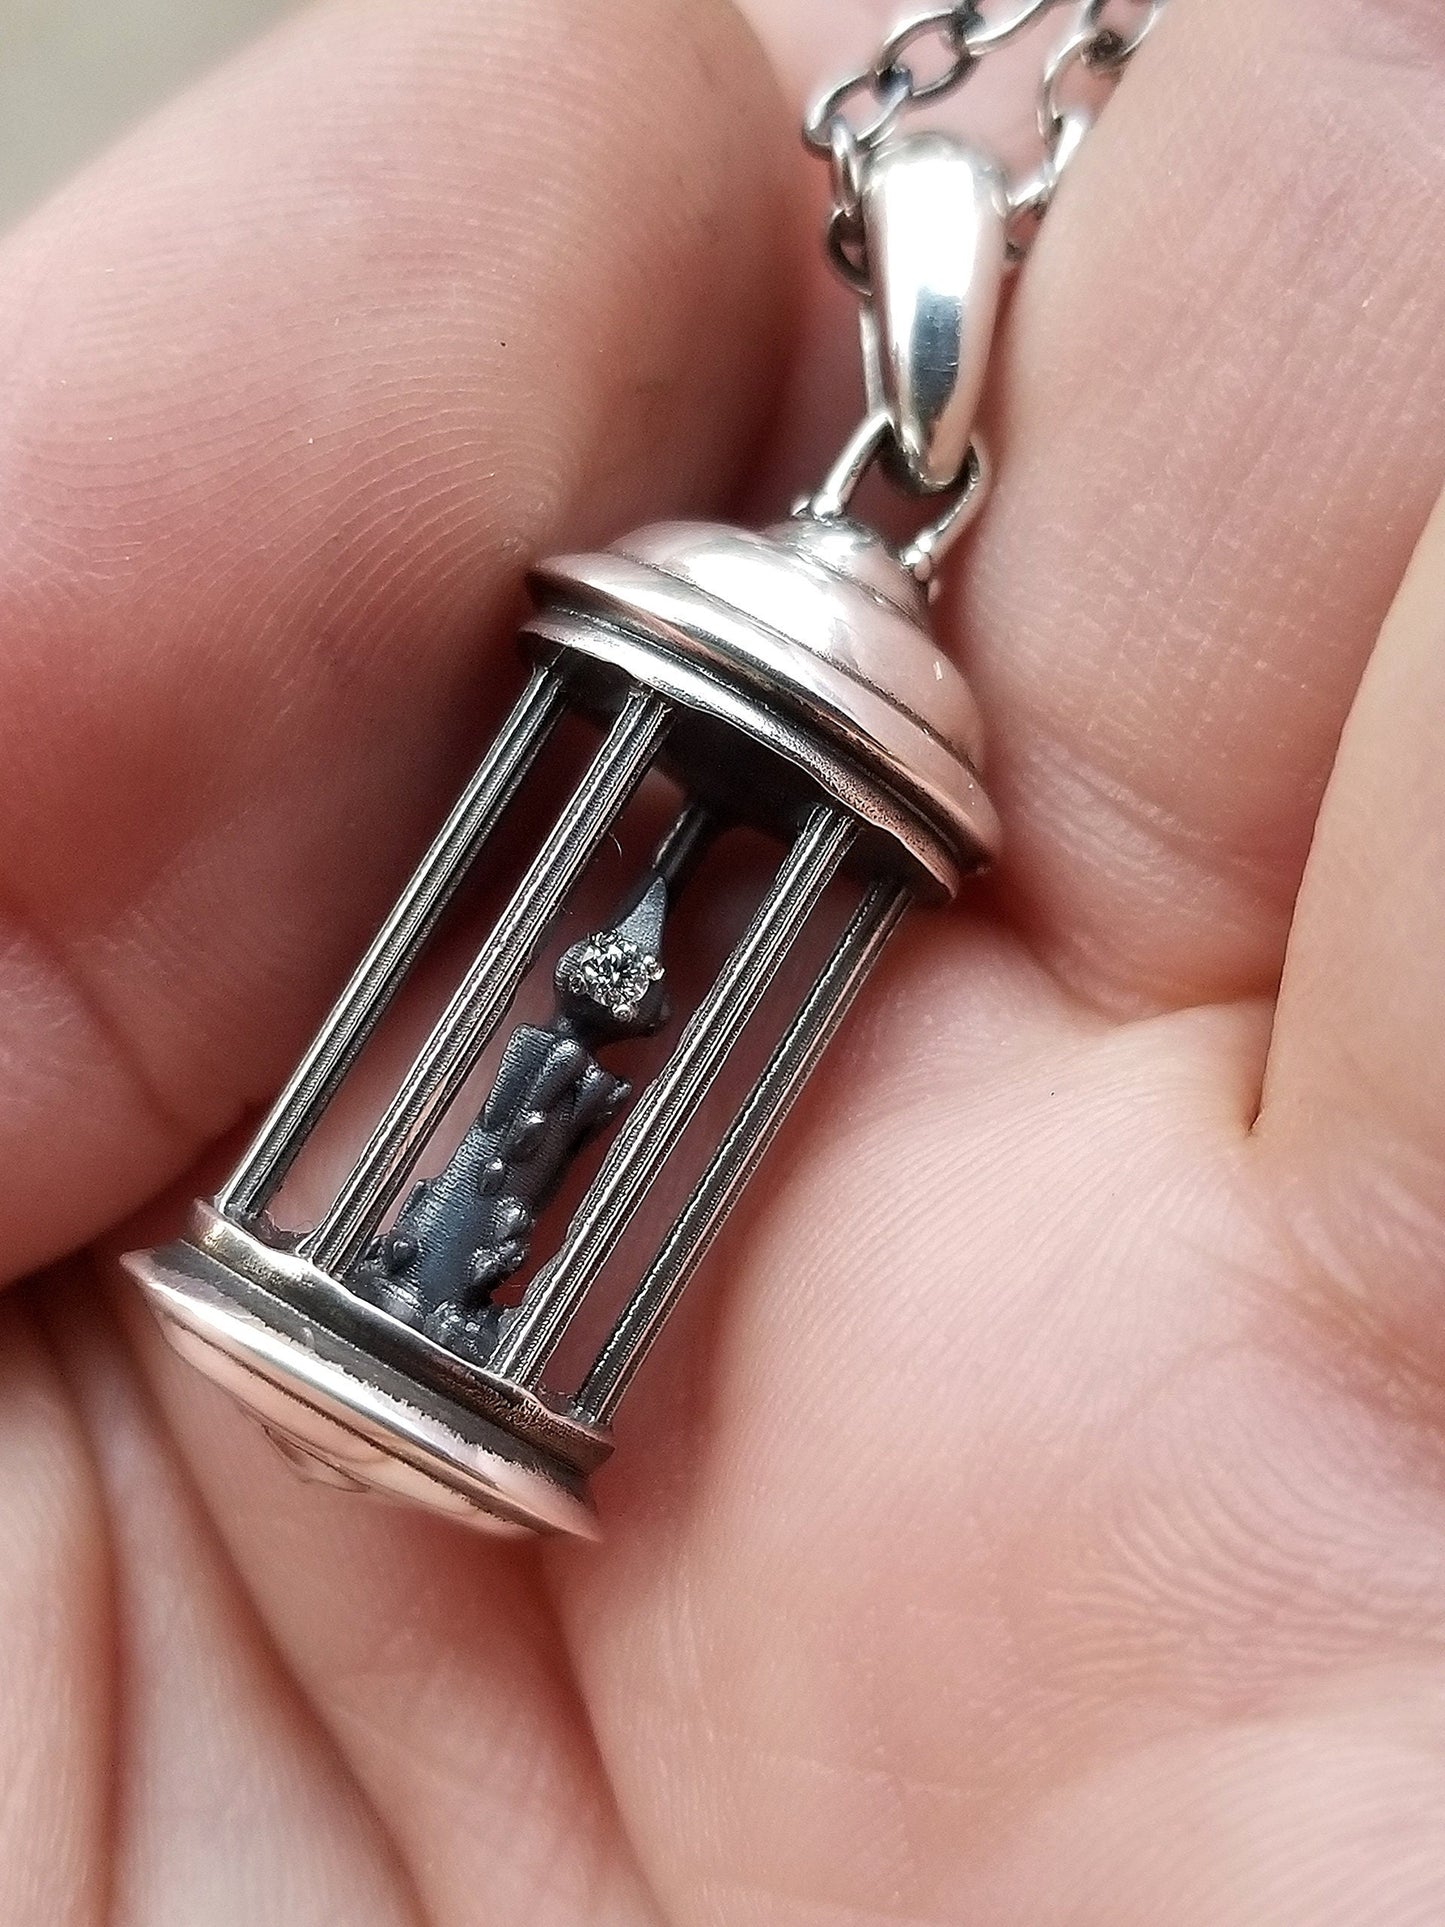 Hermit Lantern Necklace - Sterling Silver - Candlelight - Diamond Flame